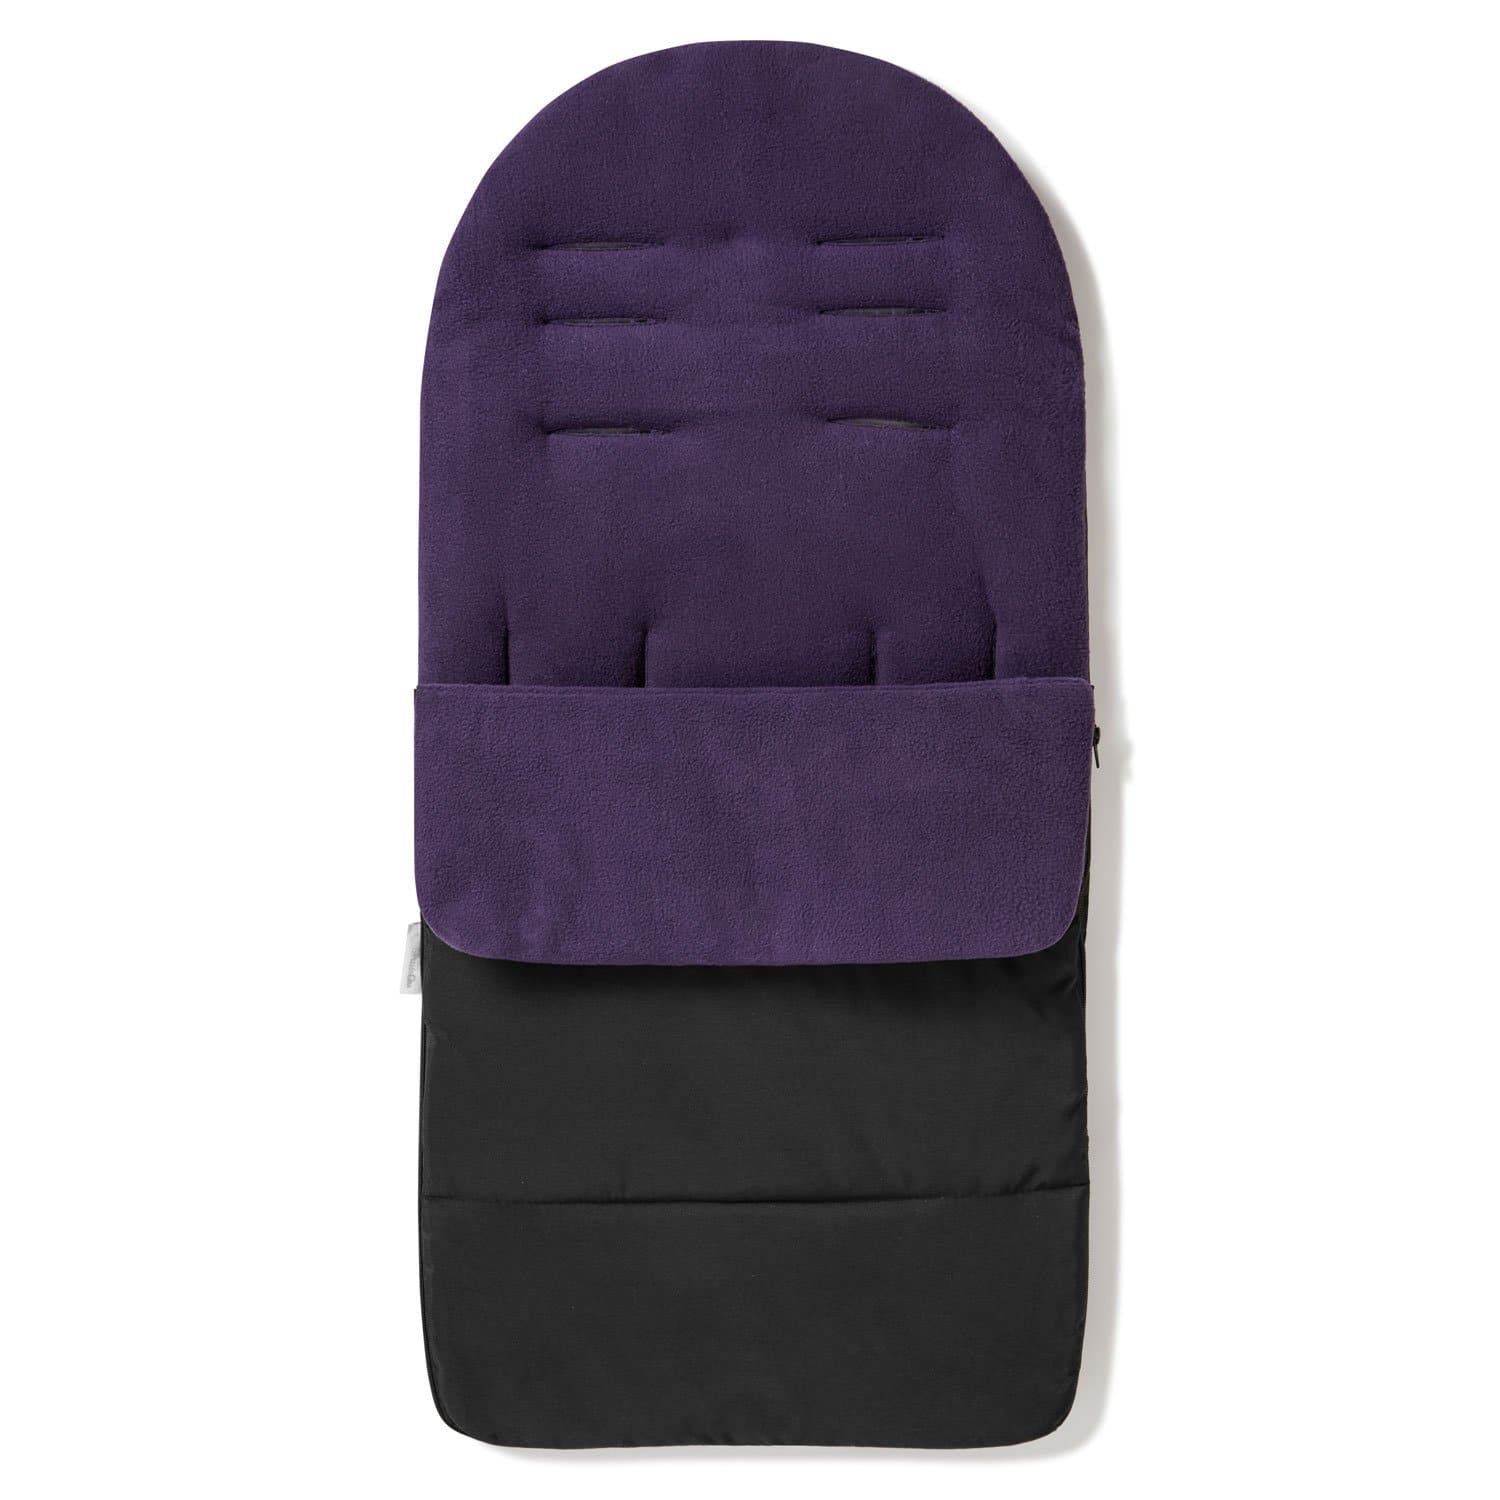 Premium Footmuff / Cosy Toes Compatible with Urban Detour - Plum Purple / Fits All Models | For Your Little One